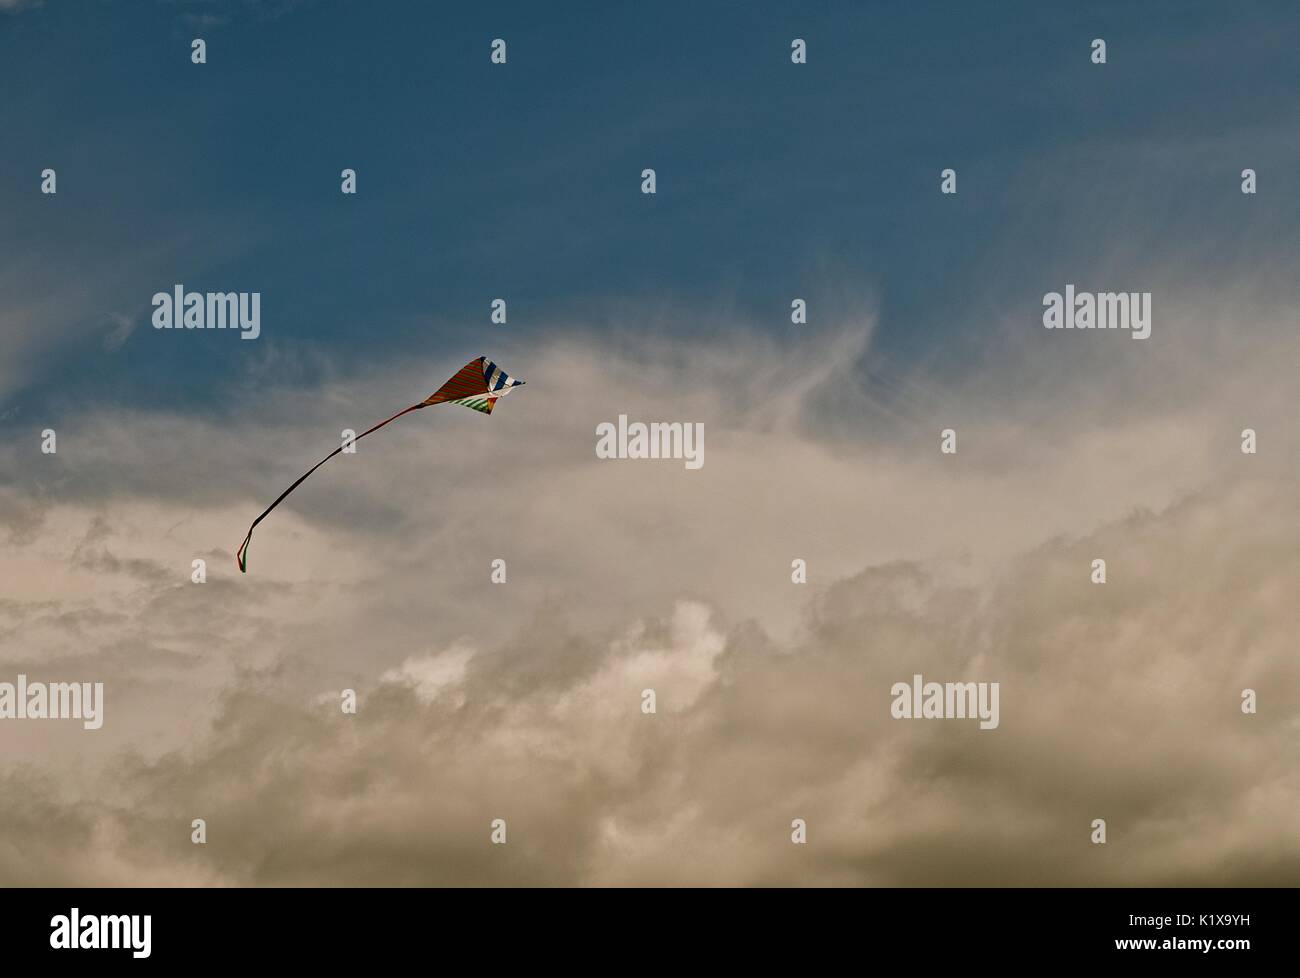 Kite flying freely and afloat in the breeze. A fun and relaxing activity for summer fun. Stock Photo